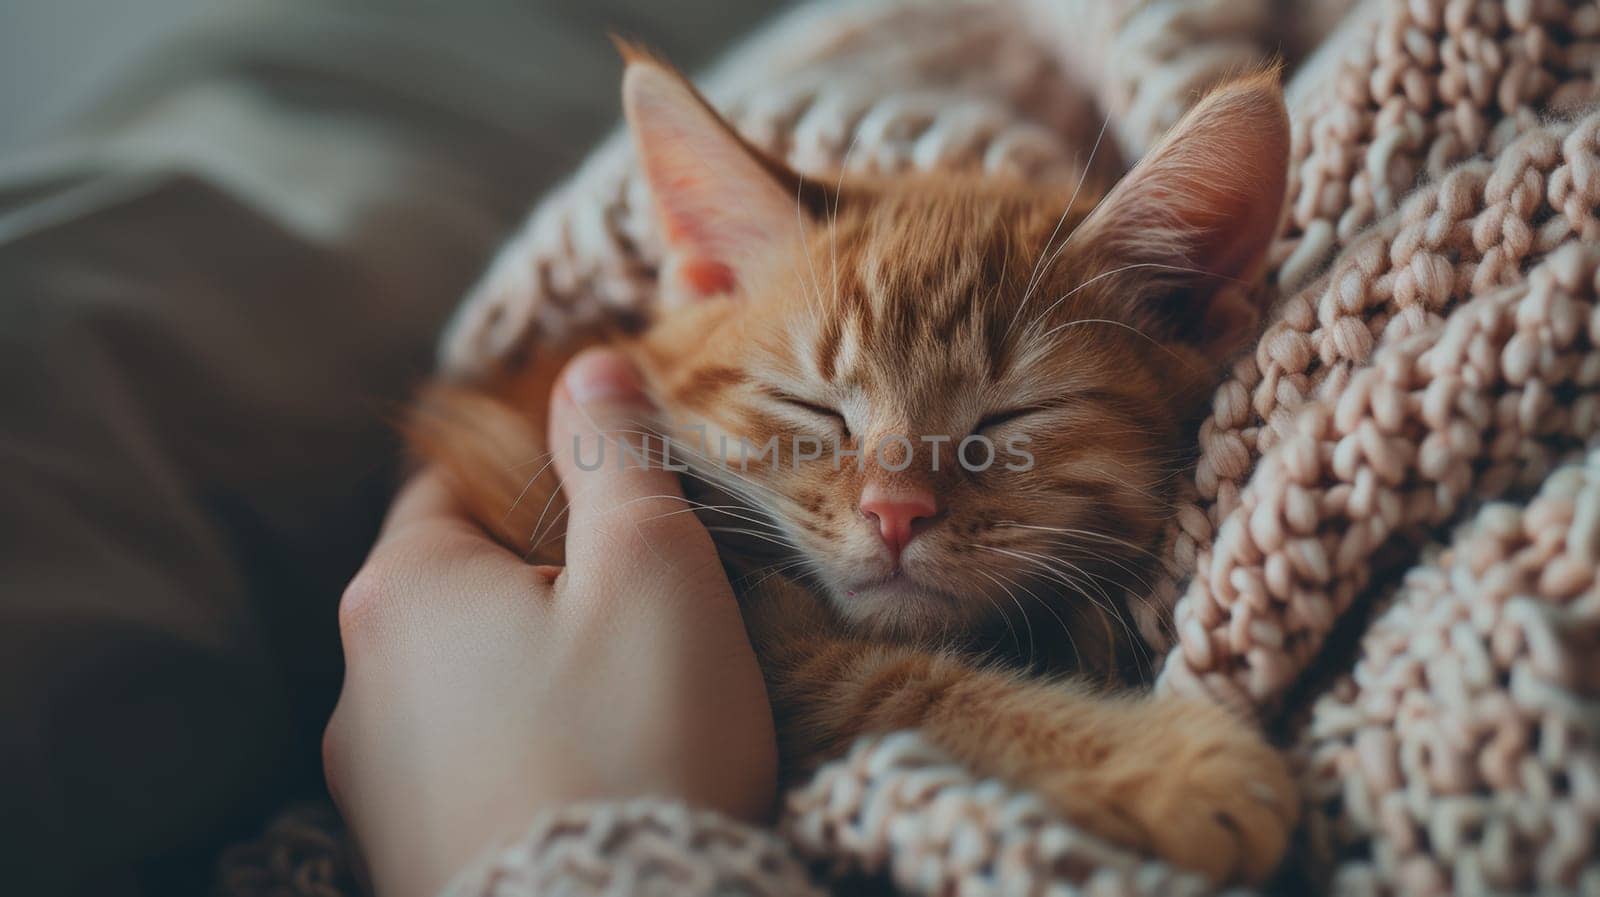 A person holding a cat in their arms while it sleeps, AI by starush